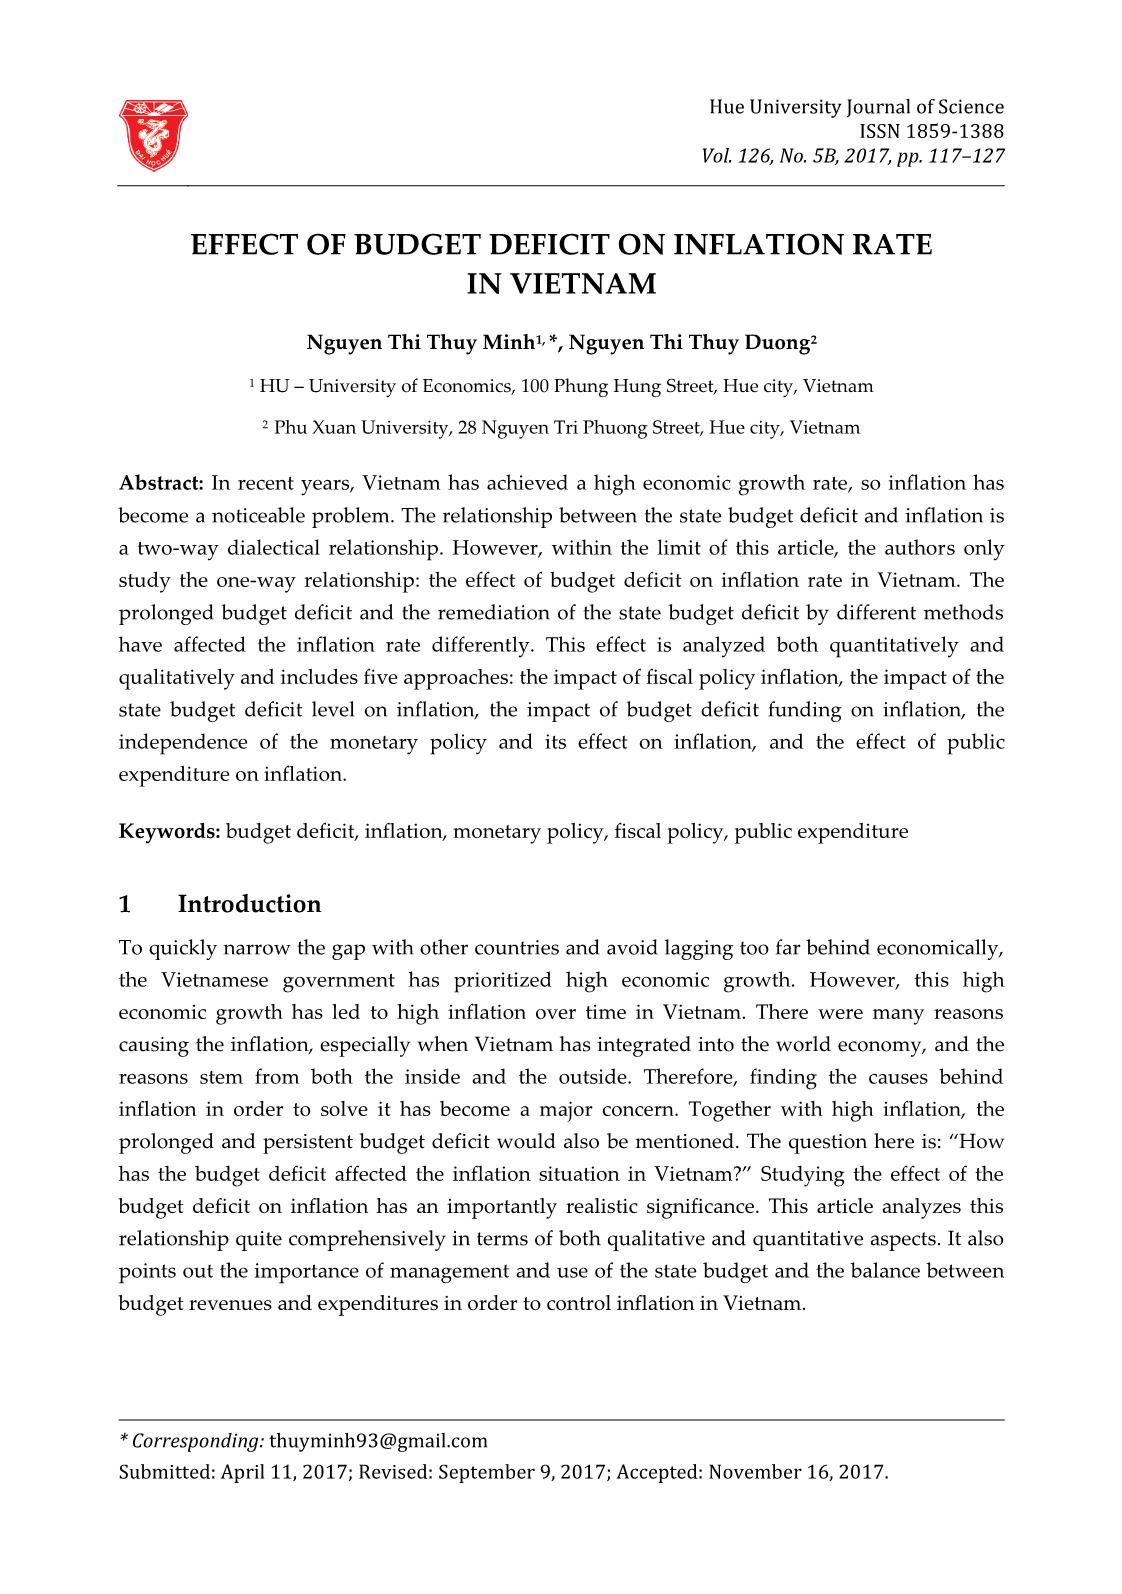 Effect of budget deficit on inflation rate in Vietnam trang 1